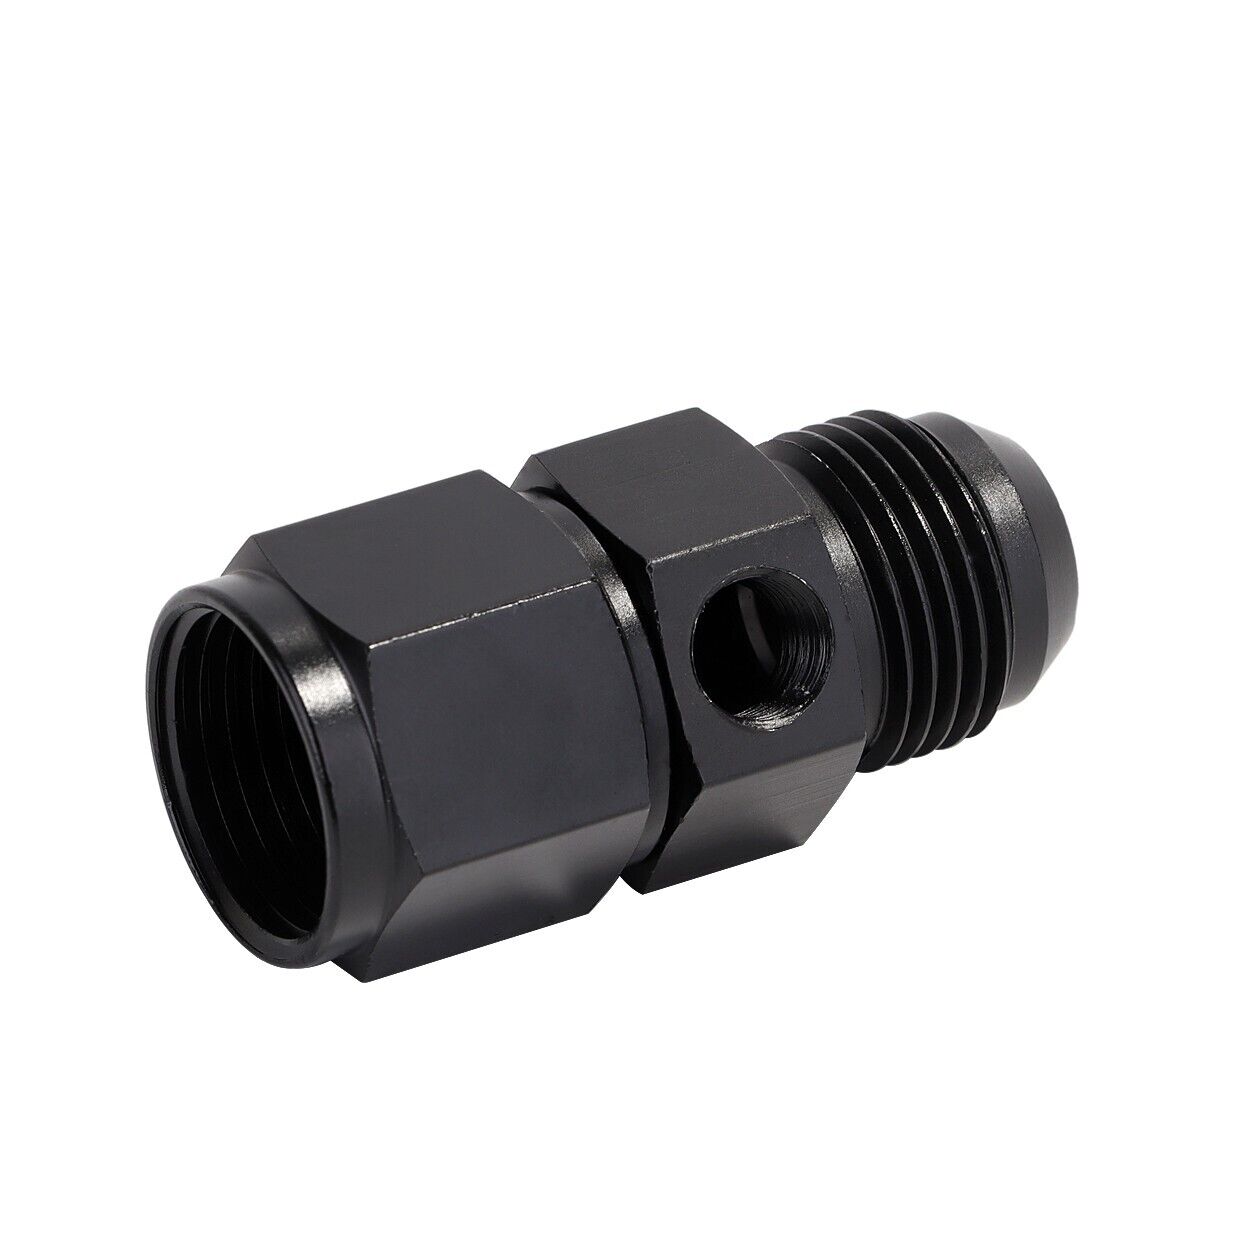 Fuel Pressure Fitting 8AN Male to Female with 1/8 NPT Gauge Port Hose Adapter